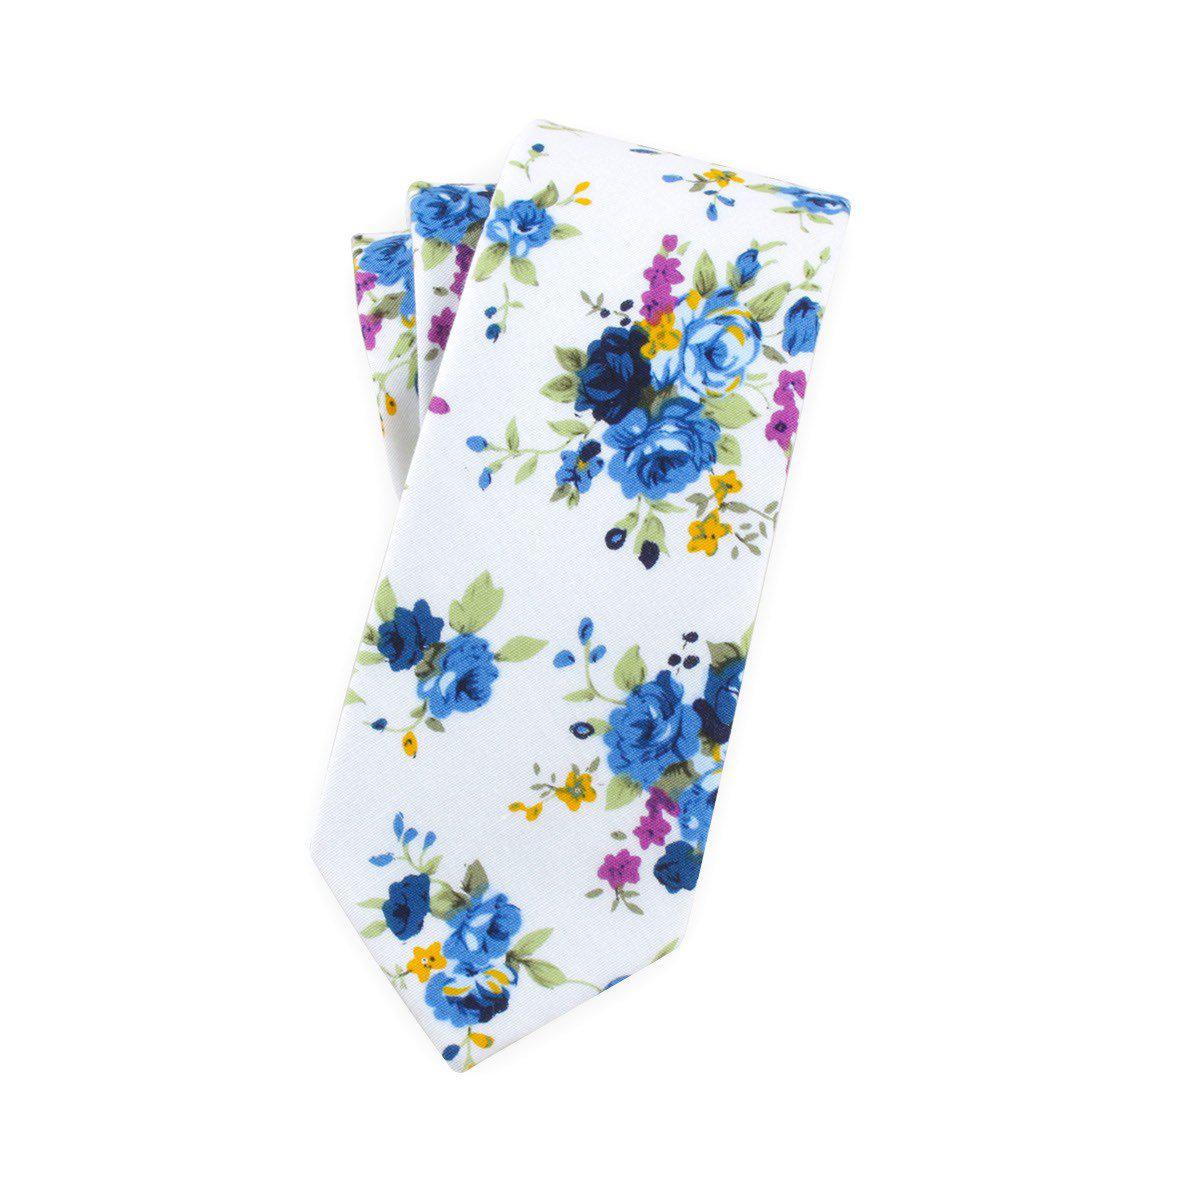 White Floral Tie 2.36" SAGE - MYTIESHOP | toile de jouy Floral print-Neckties-Dry flowers Floral skinny tie for anniversaries weddings prom and other events. Flower cotton necktie. toile de jouy Floral tie White floral tie white-Mytieshop. Skinny ties for weddings anniversaries. Father of bride. Groomsmen. Cool skinny neckties for men. Neckwear for prom, missions and fancy events. Gift ideas for men. Anniversaries ideas. Wedding aesthetics. Flower ties. Dry flower ties.